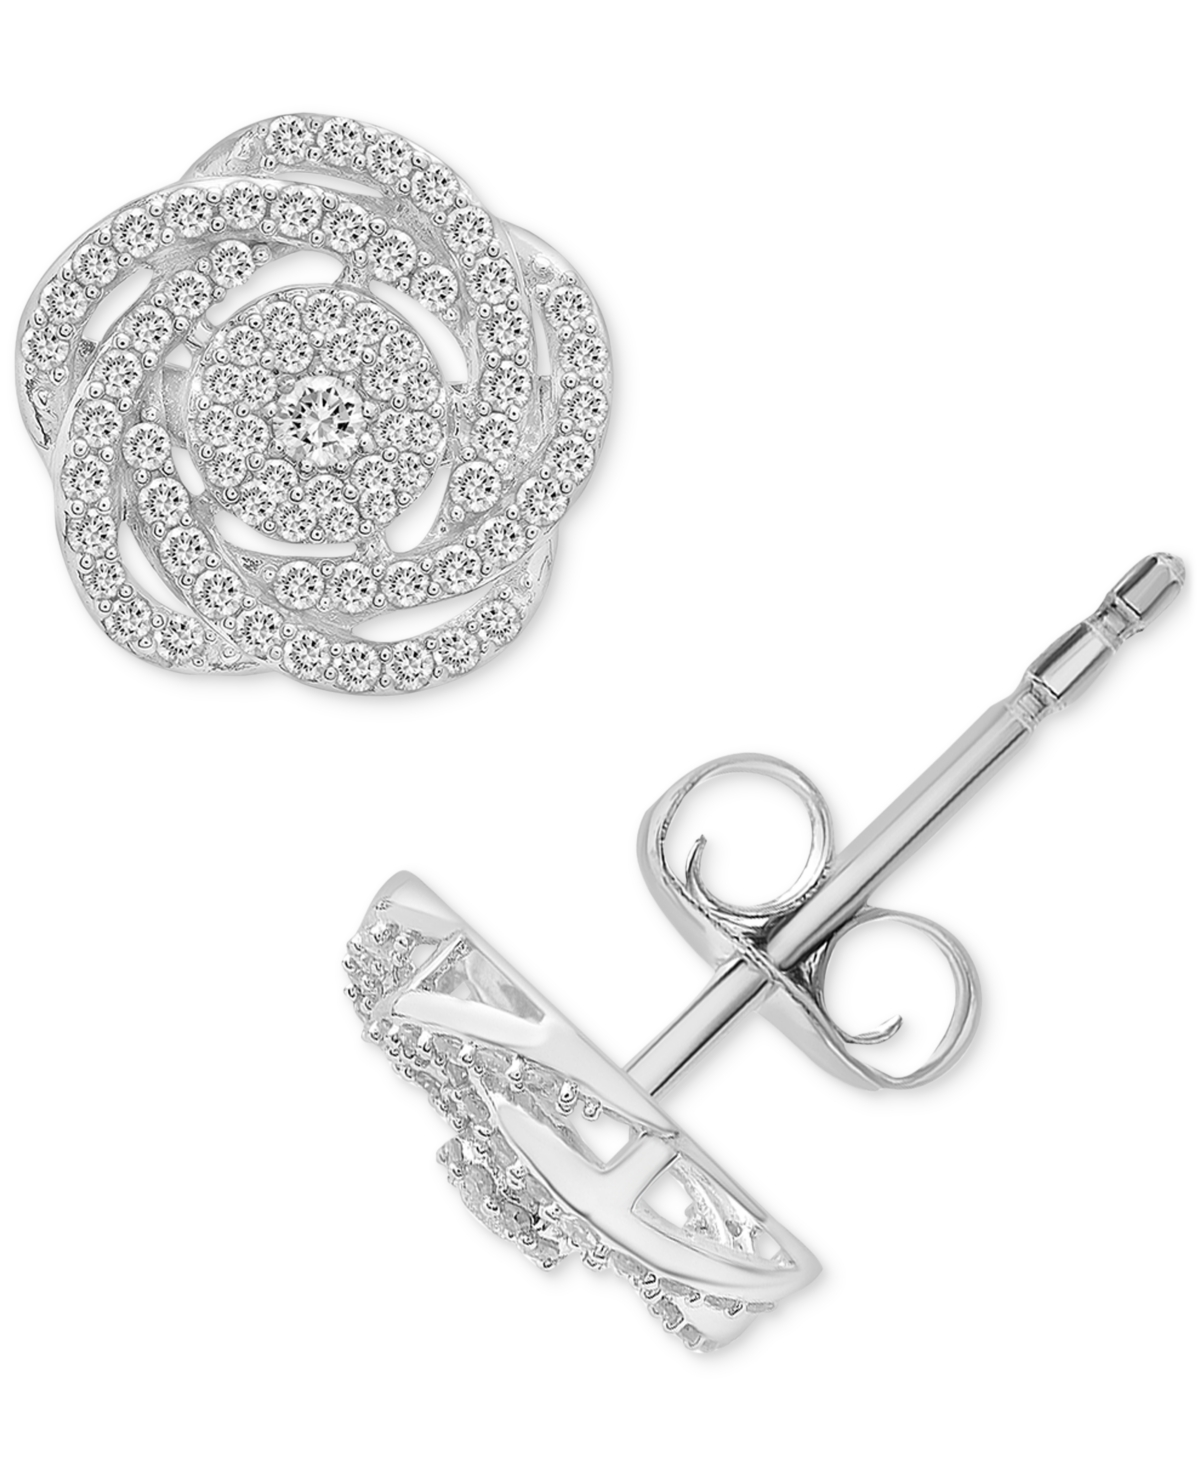 Wrapped in Love, 14k White Gold Diamond Pave Knot Earrings (1 ct. t.w.), Created for Macy's - White Gold